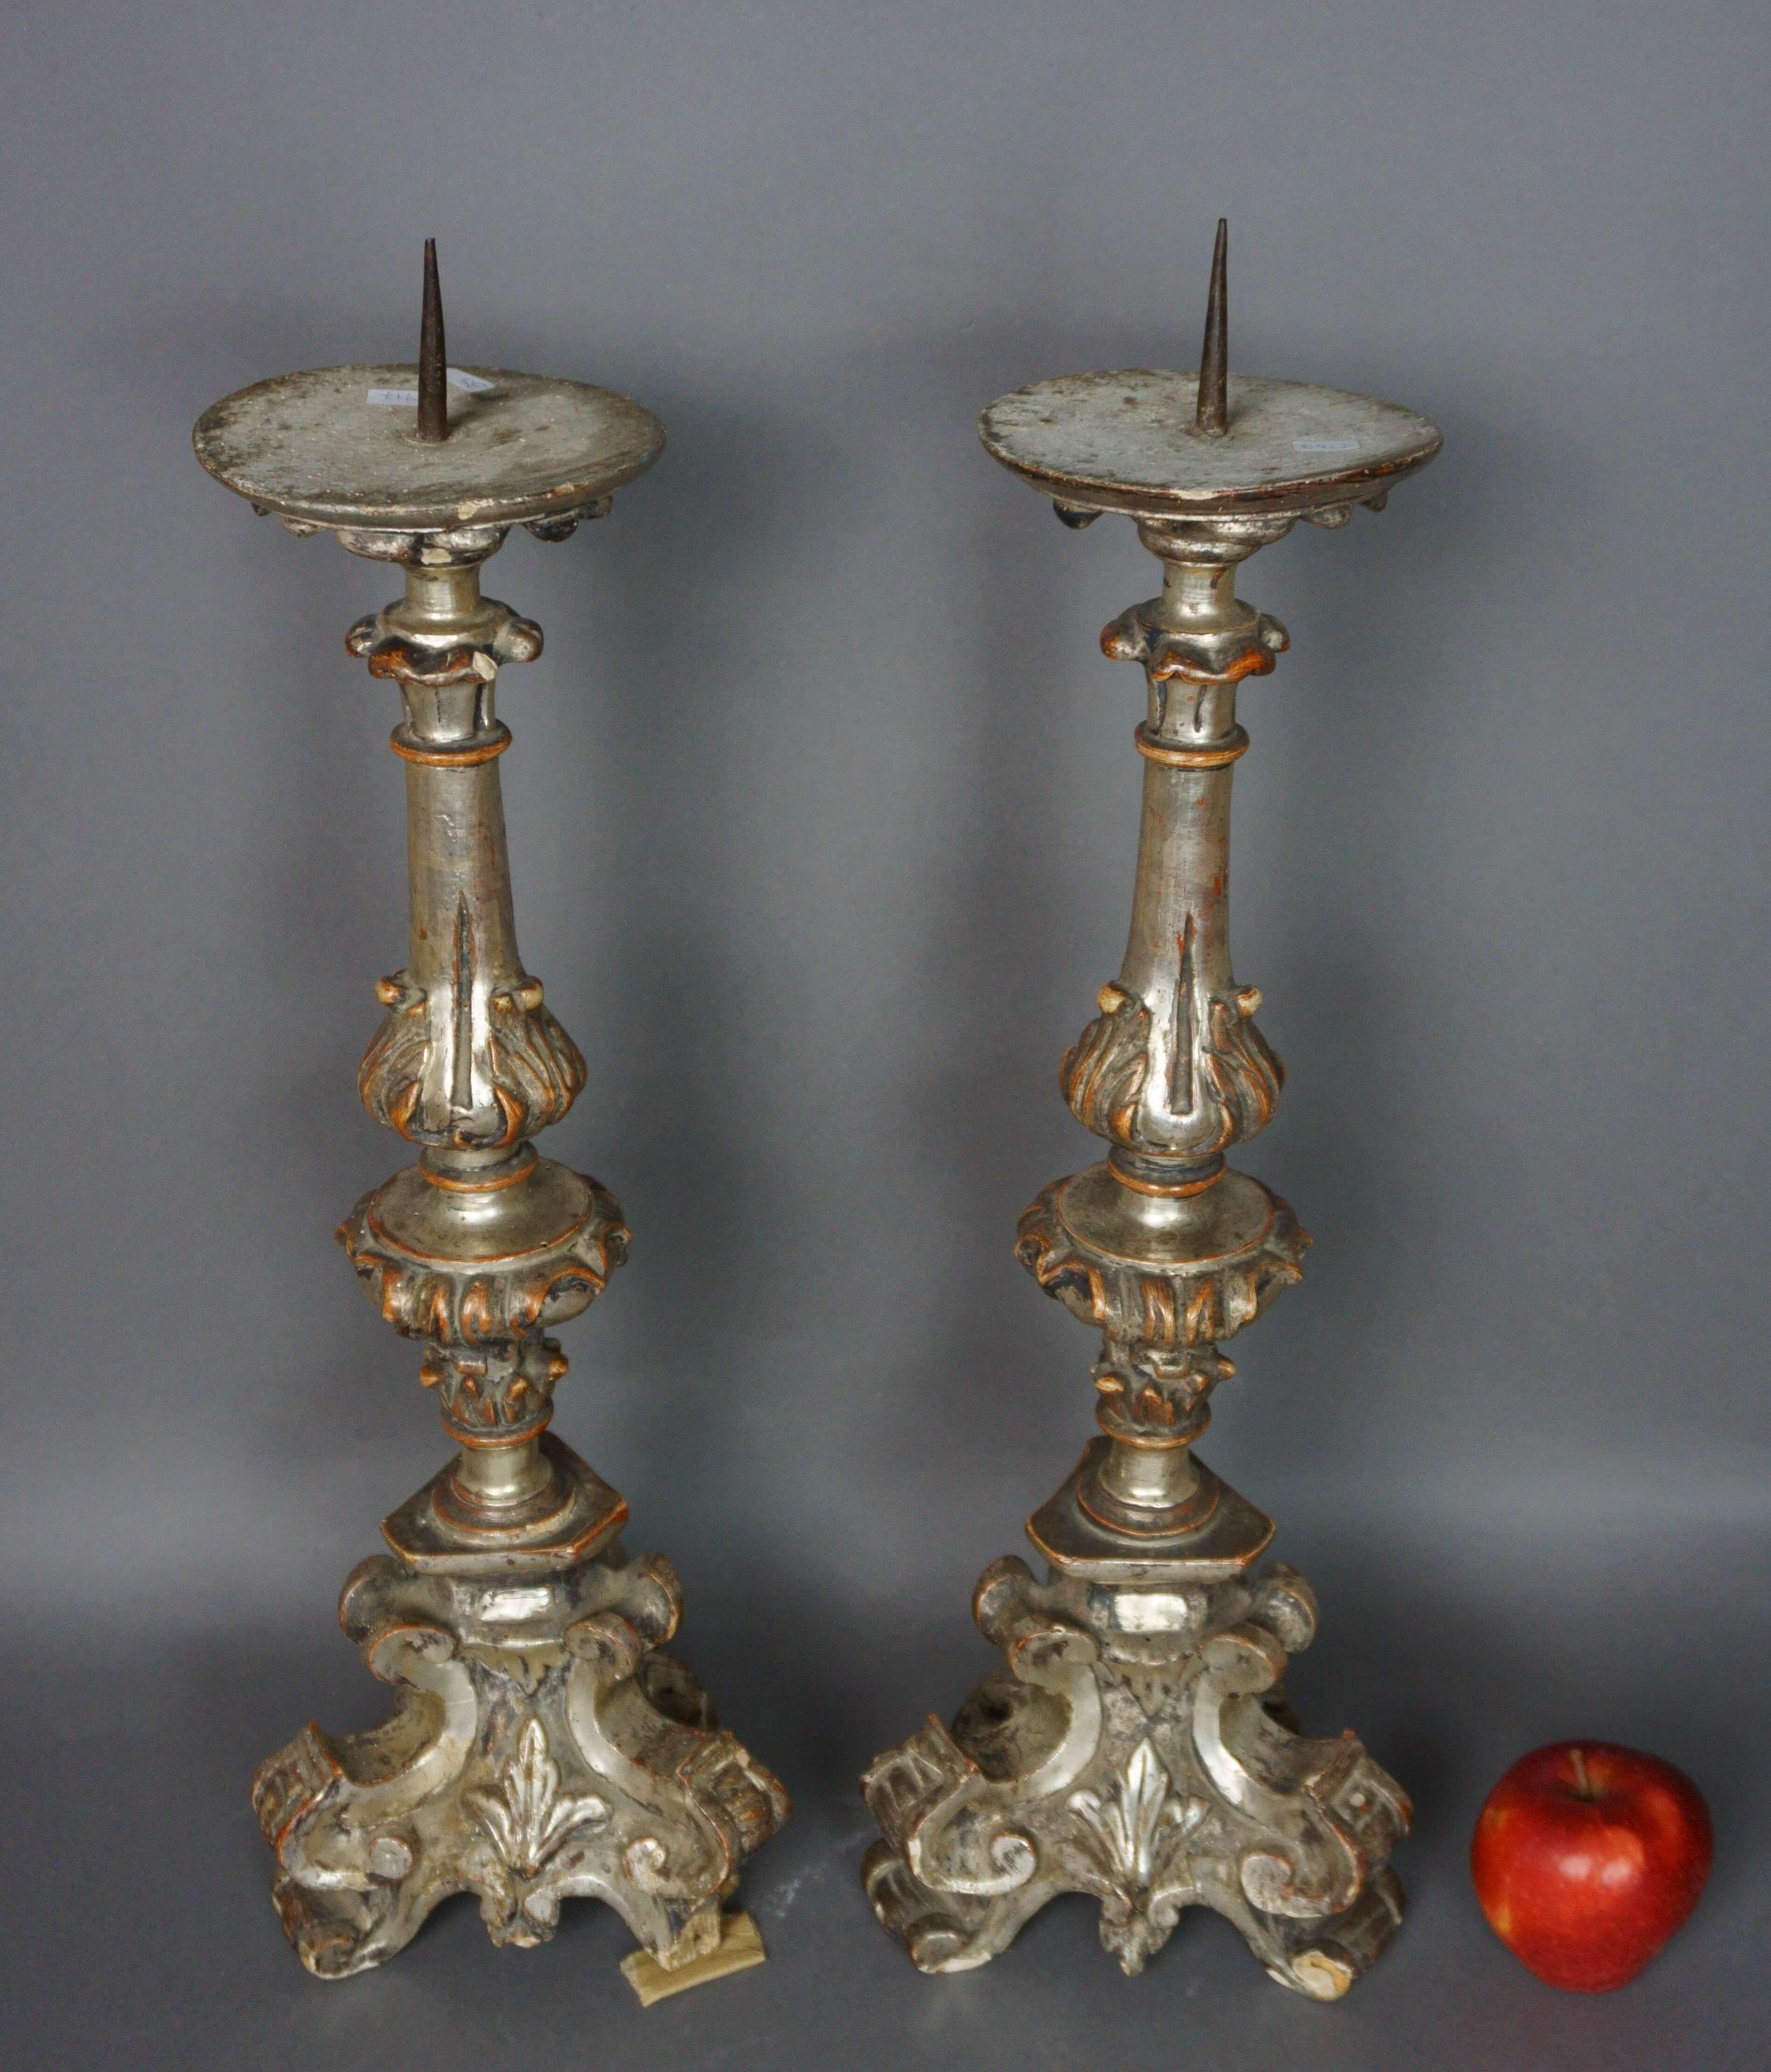 Pair of Italian carved and silvered wood church candelabras, Louis XIV style, Italy, 17th century.
Very beautiful quality, richly carved. Original patina.